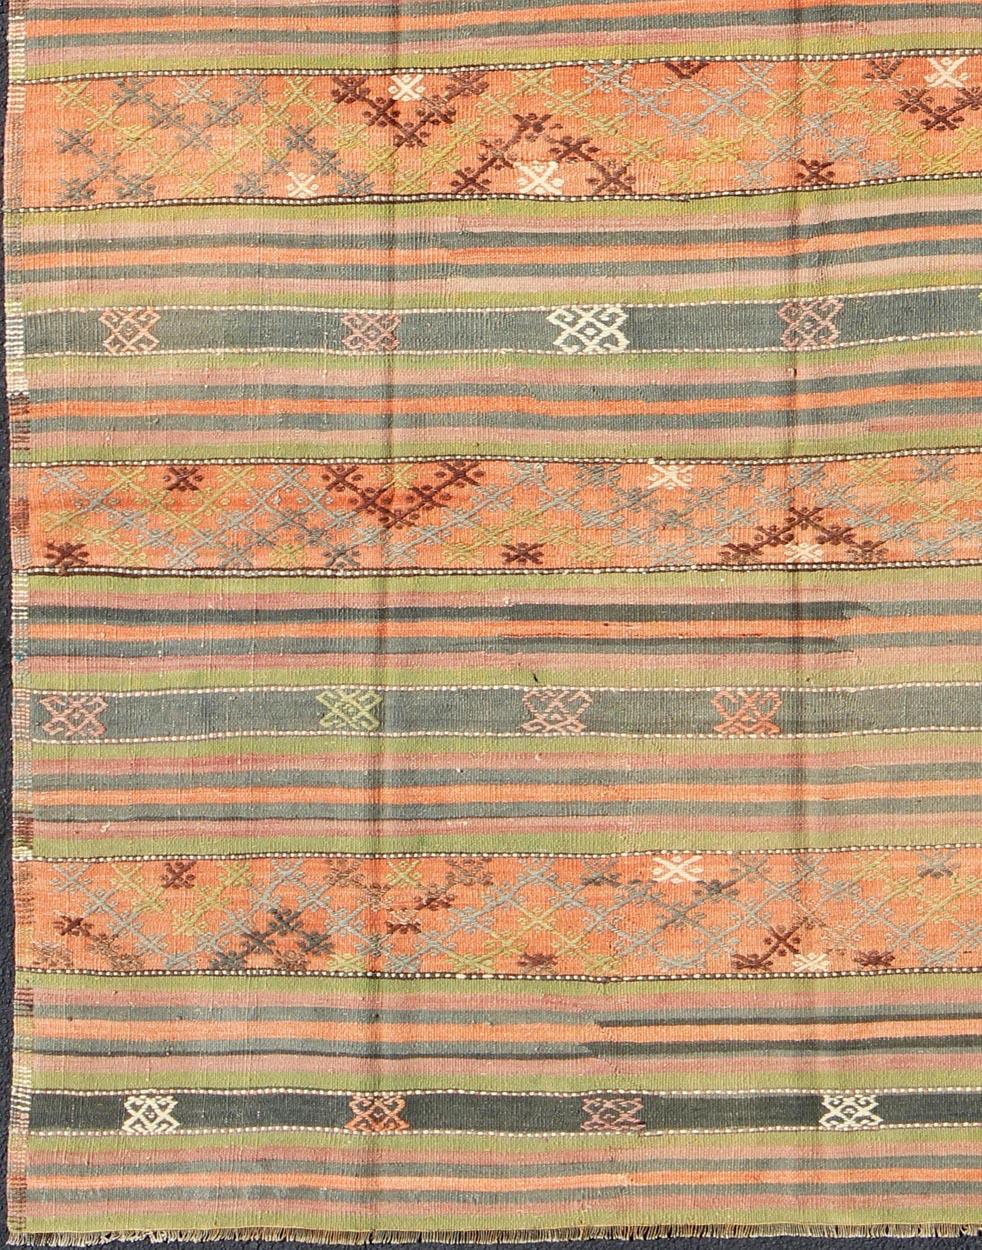 Vintage Turkish Kilim rug with geometric shapes and colorful stripes, rug ned-28, country of origin / type: turkey / Kilim, circa mid-20th century

Featuring geometric shapes rendered in a repeating horizontal stripe design, this unique